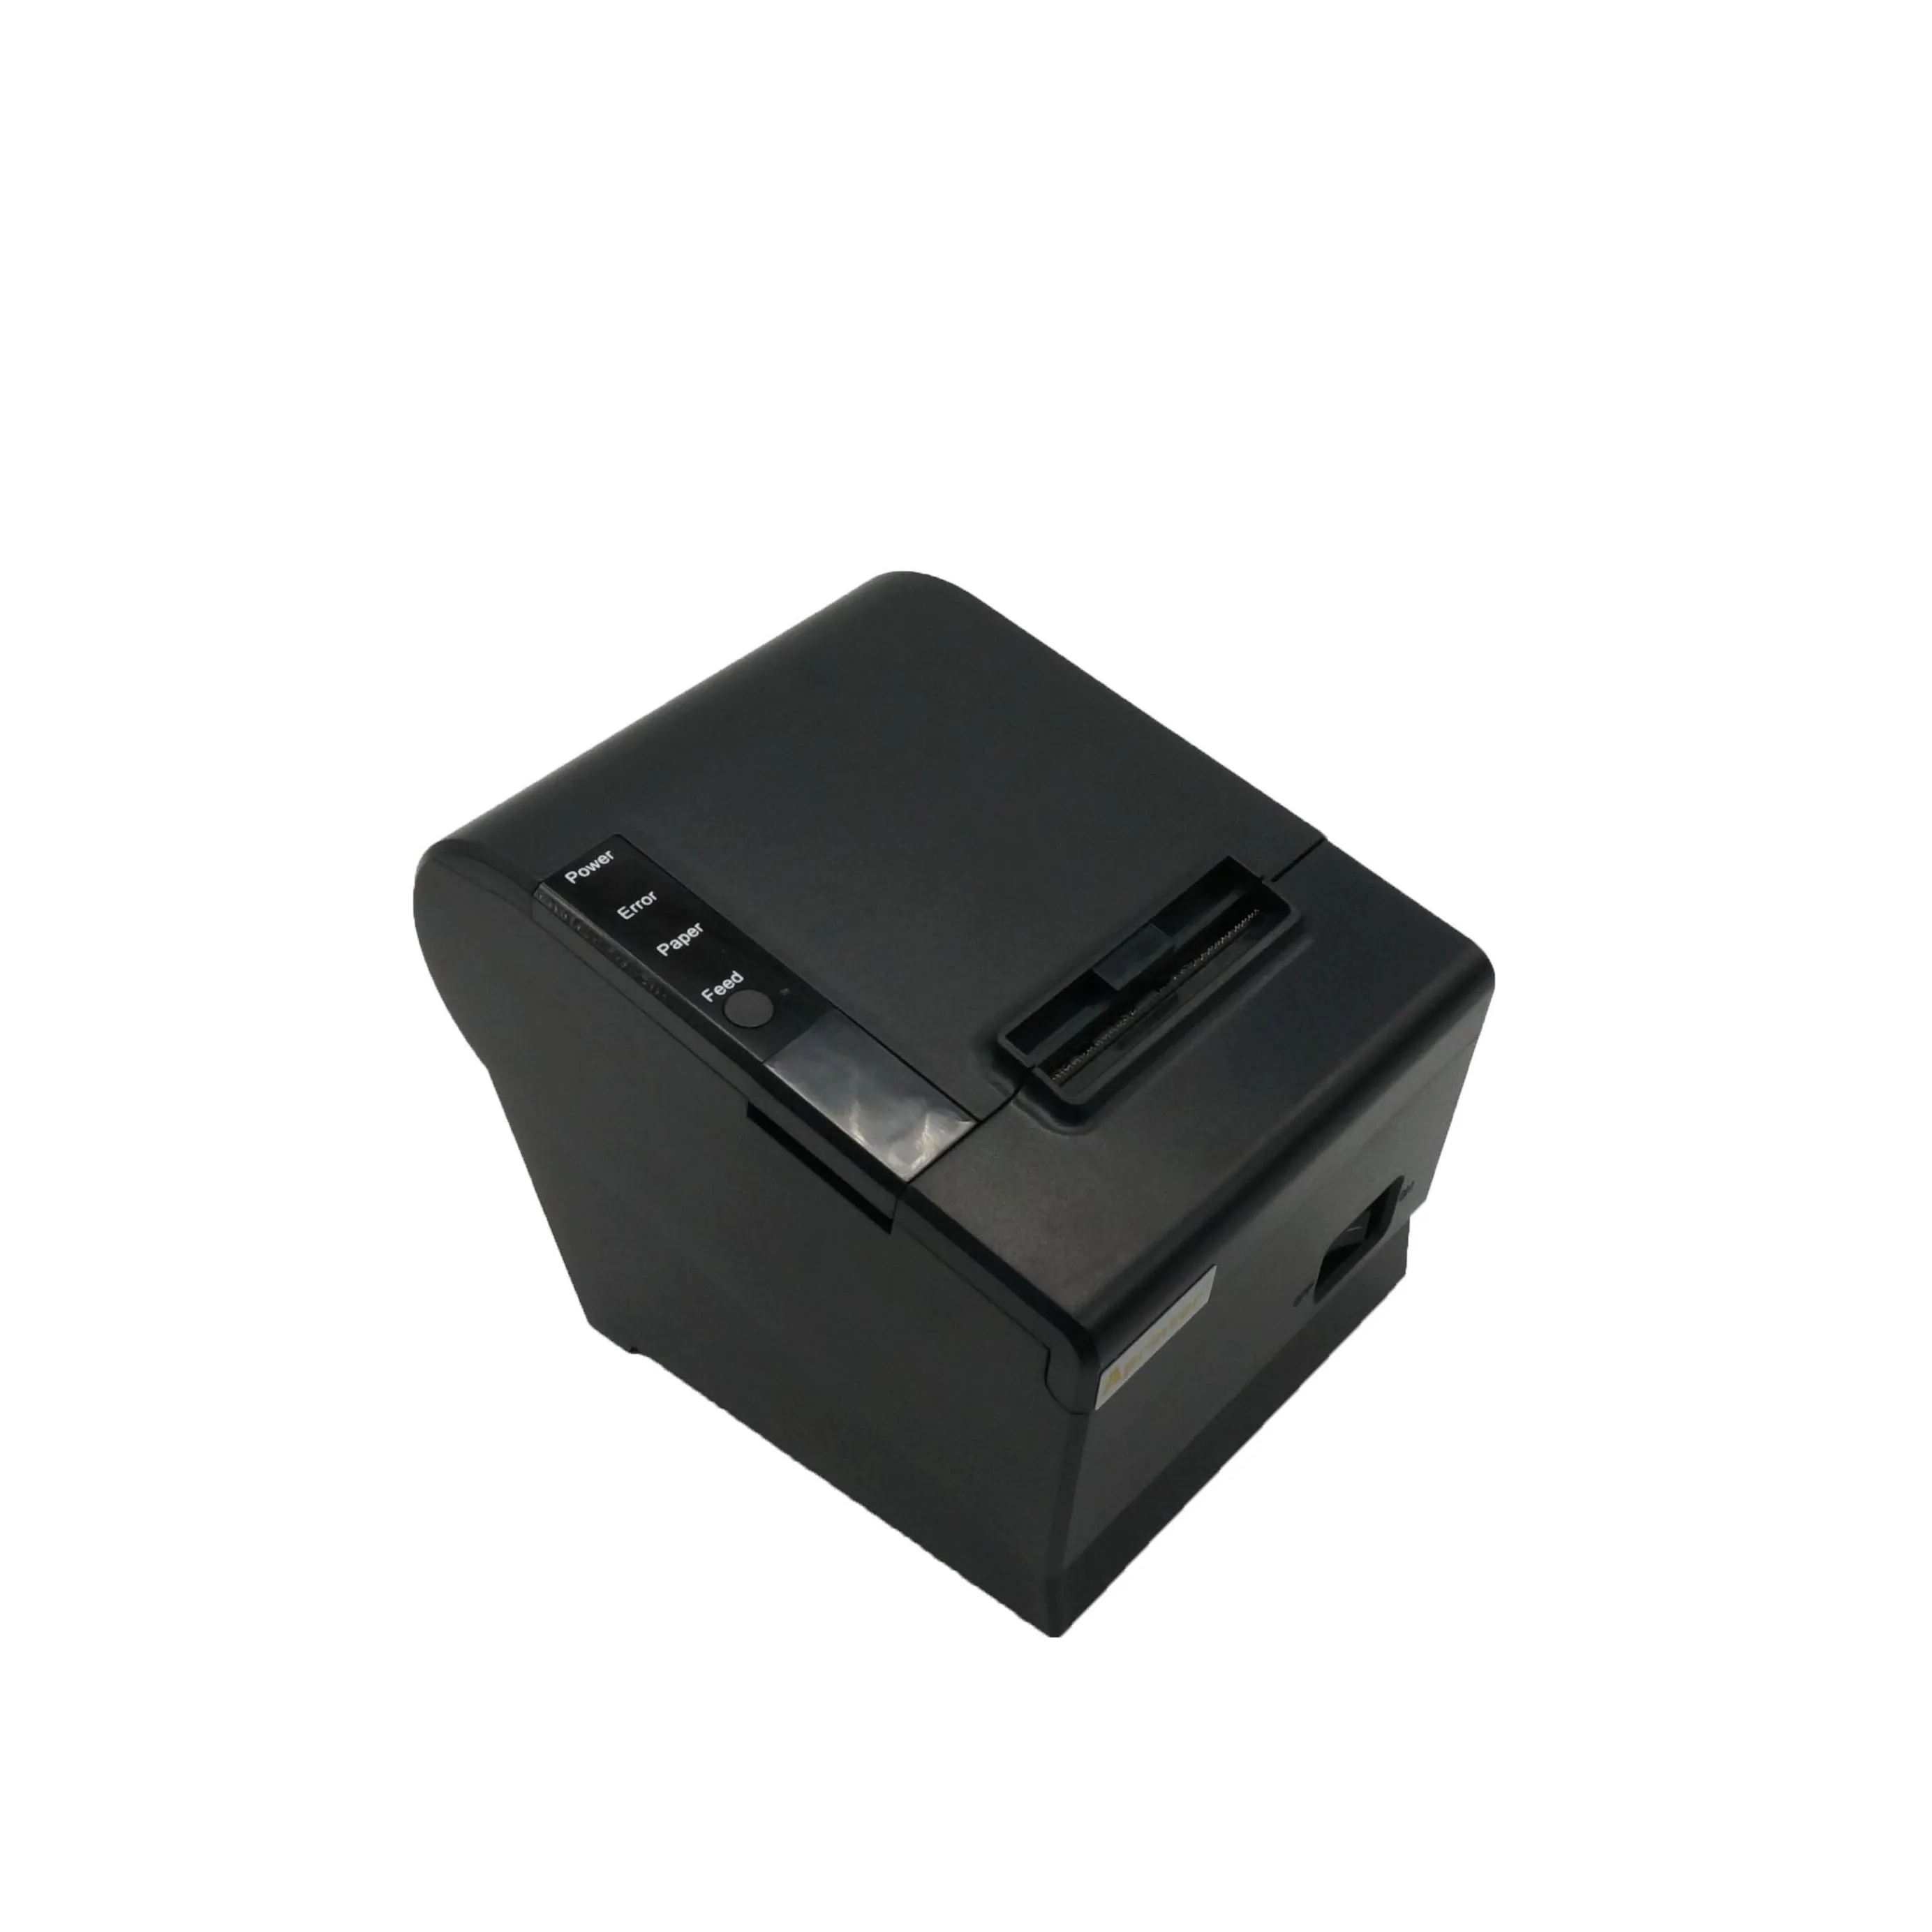 58mm USB POS thermal printer machine LAN Interface with cutter high speed printing Support Logo download and print HS-K58CUL